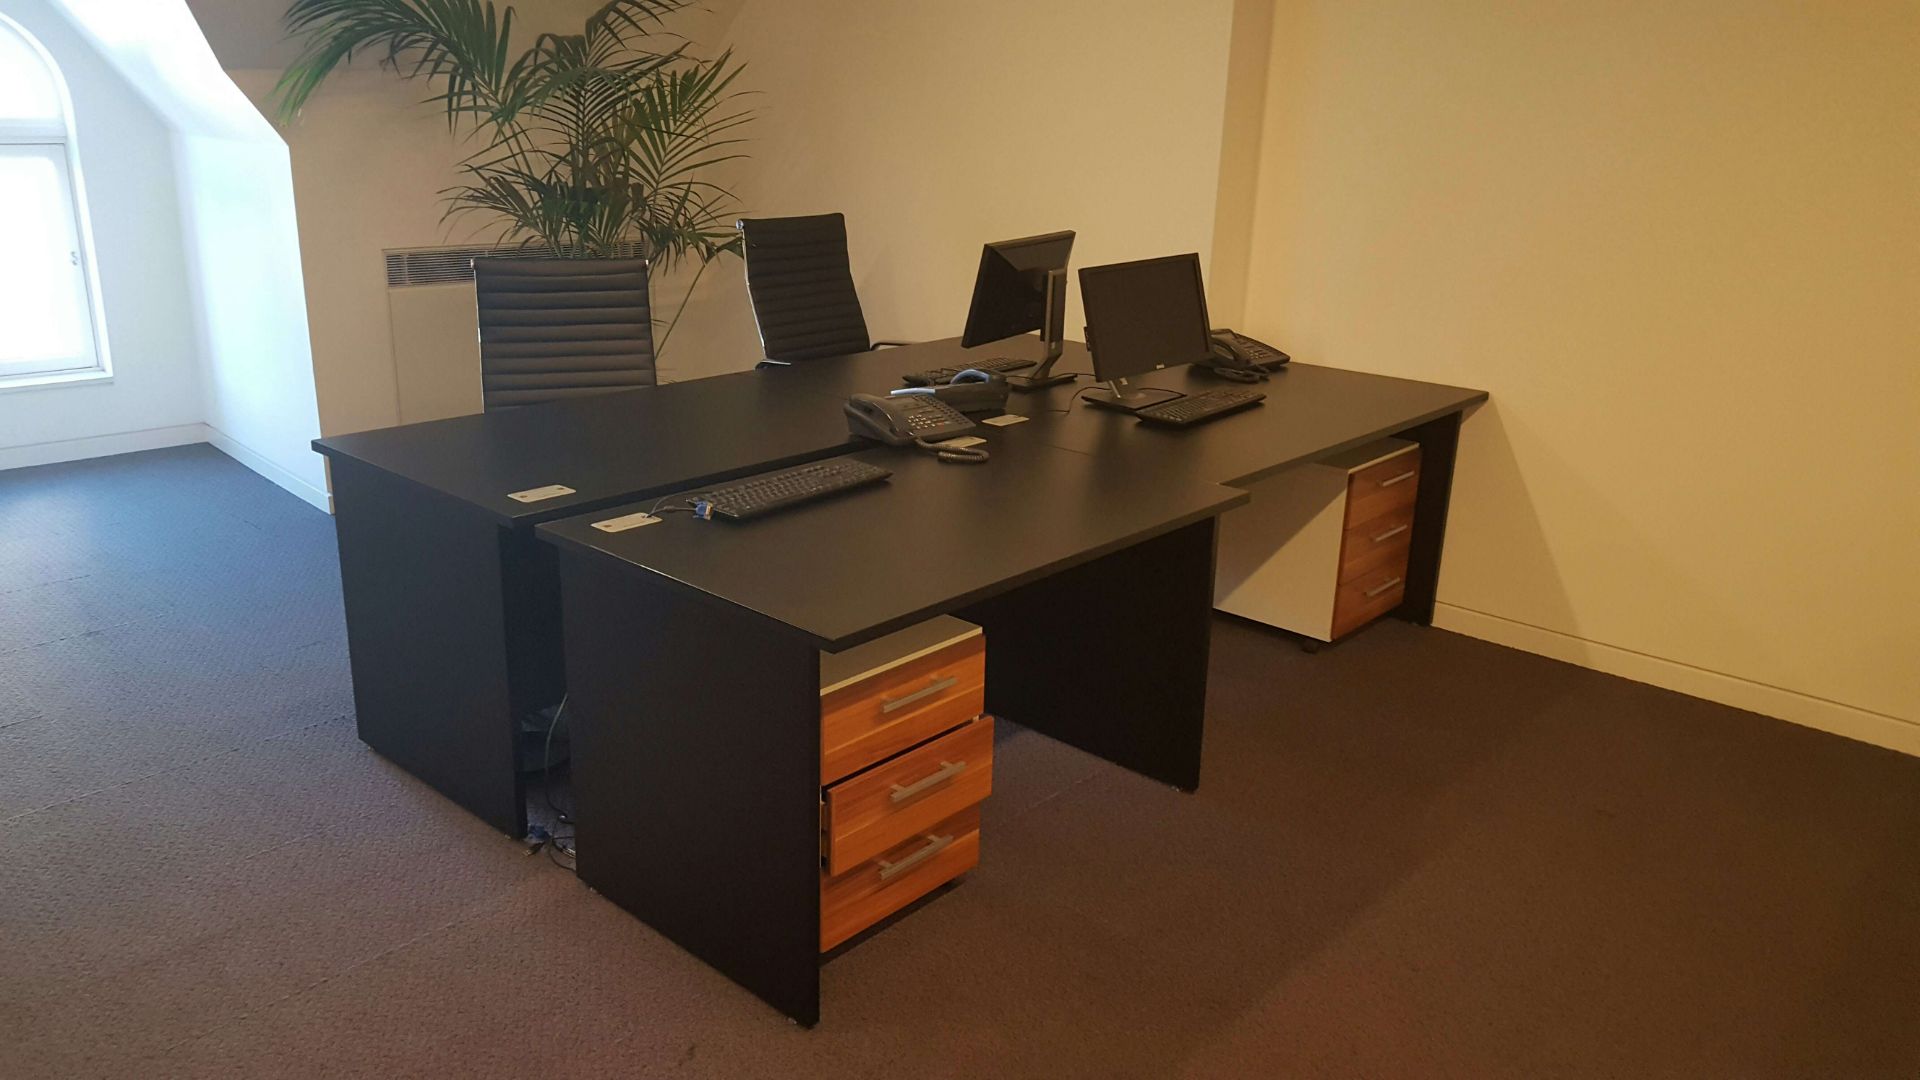 Lee and Plumpton Black Top Office Desk with Silver Framework